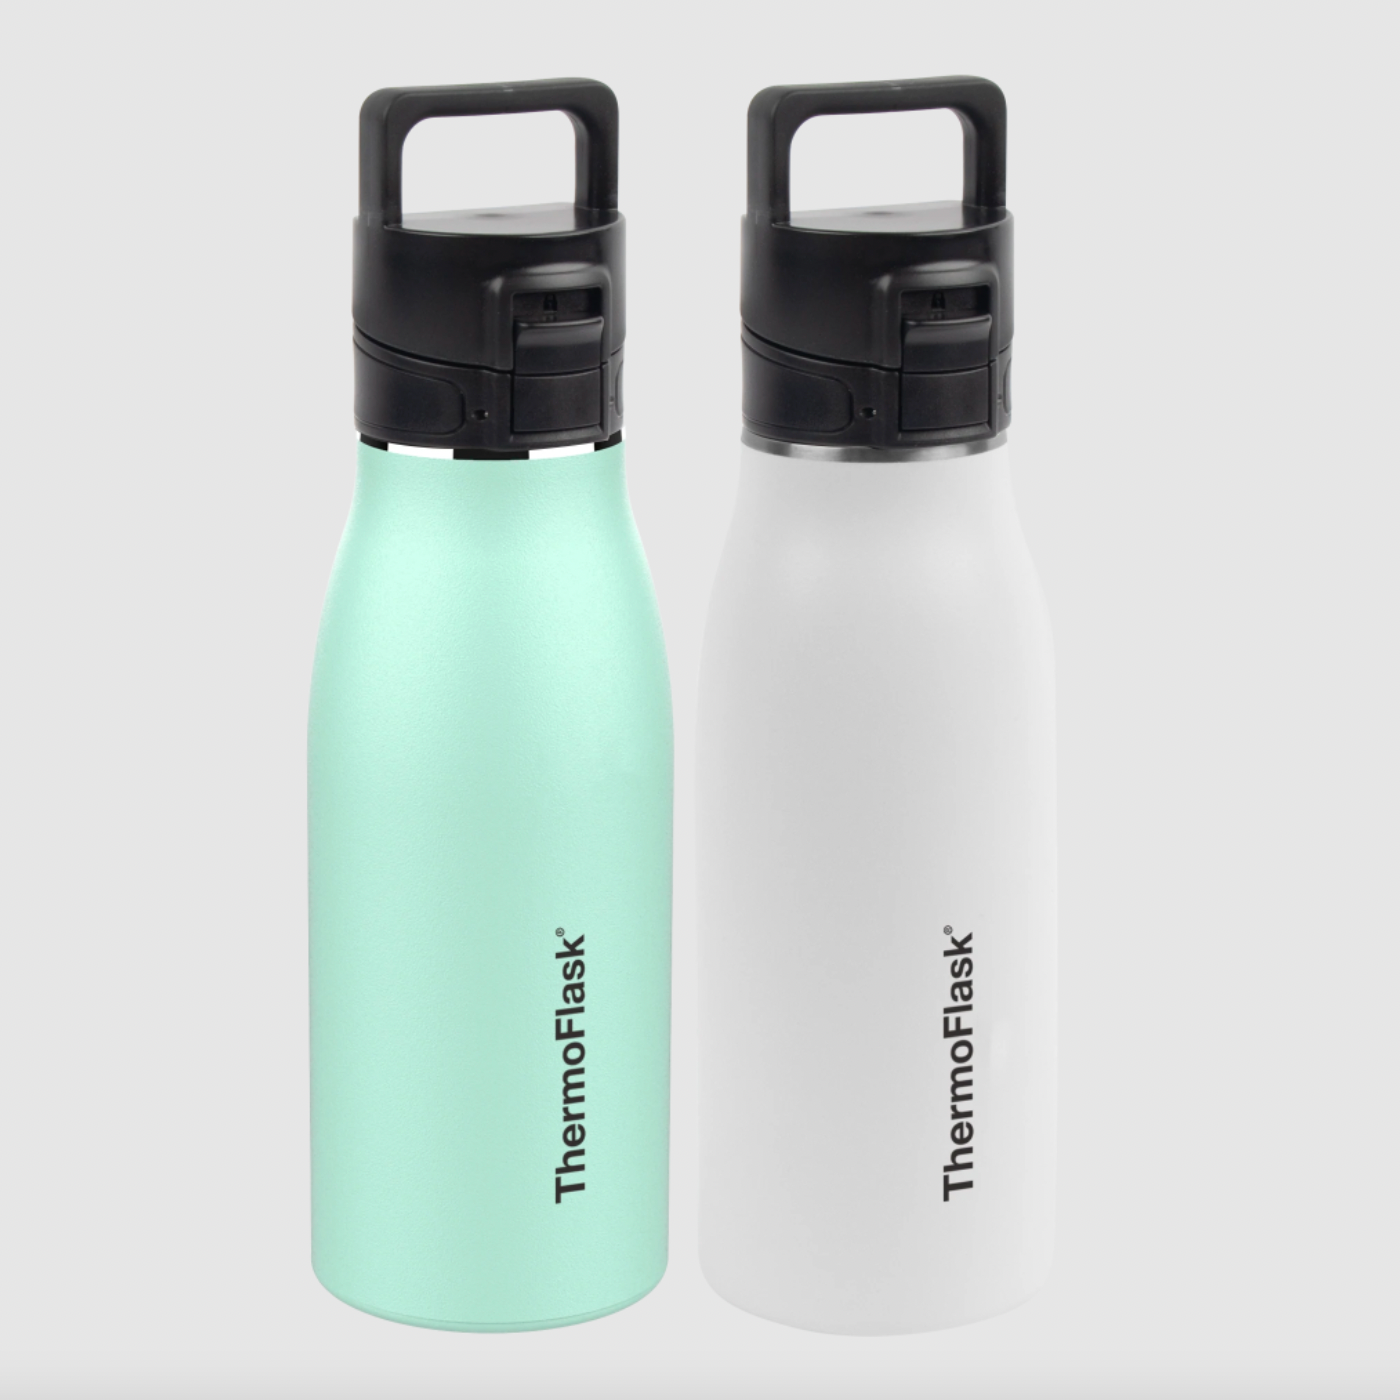 https://pyxis.nymag.com/v1/imgs/c7e/9a7/14081f0809cd76ad62b080ba17f8f58d13-thermoflask.png